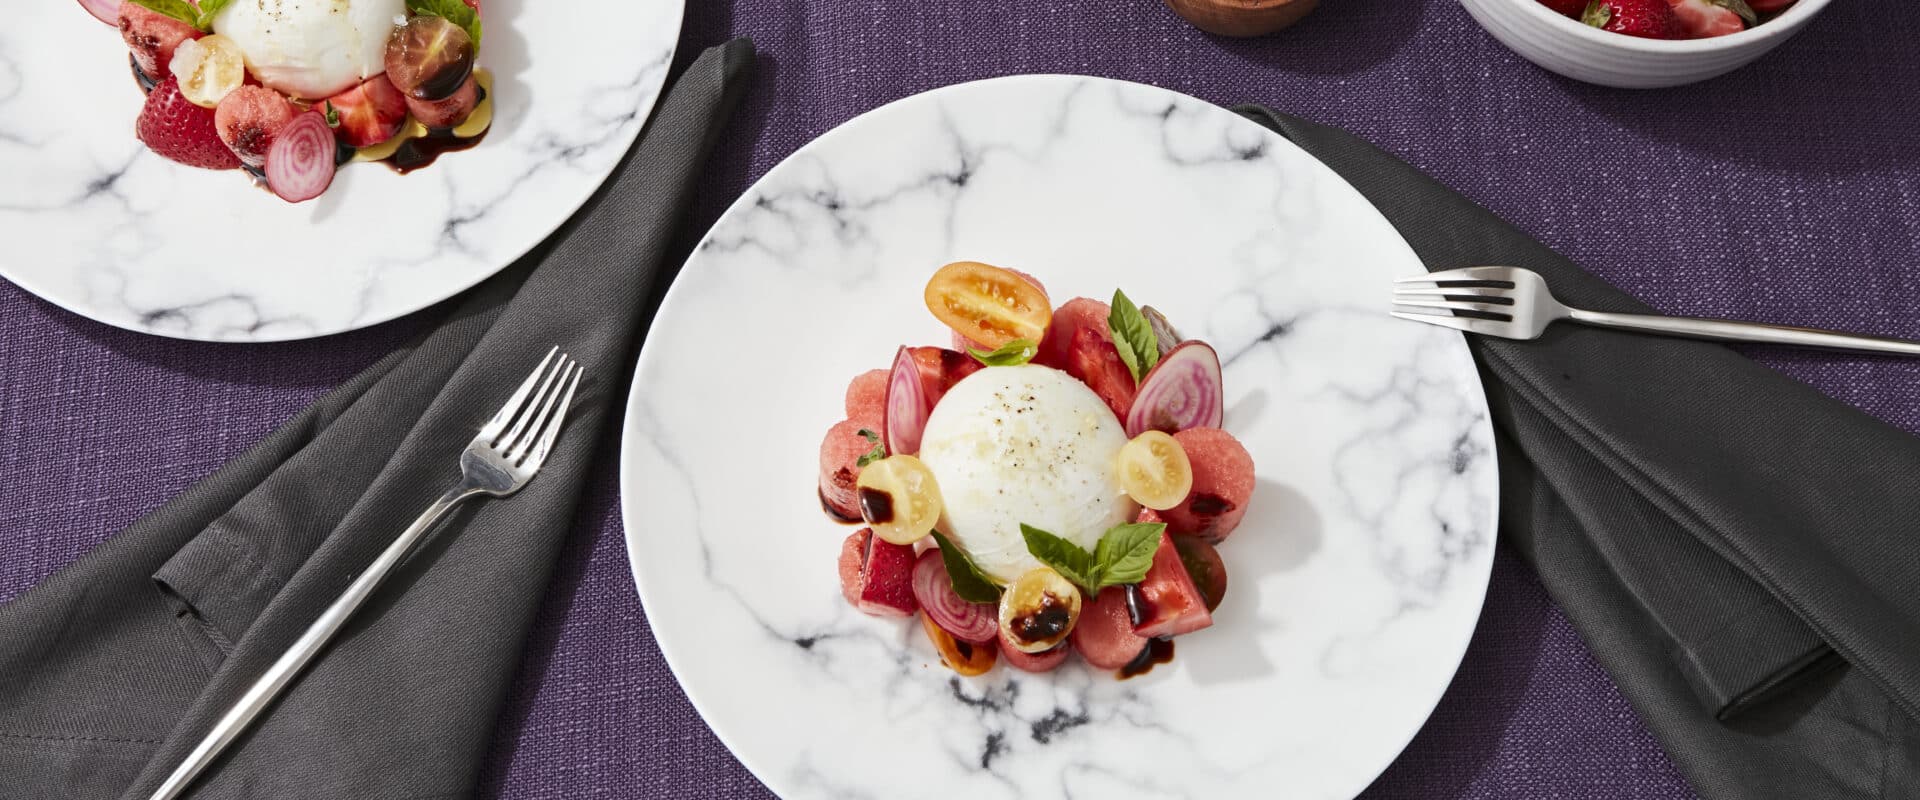 Burrata And Summer Fruits NYC Catering